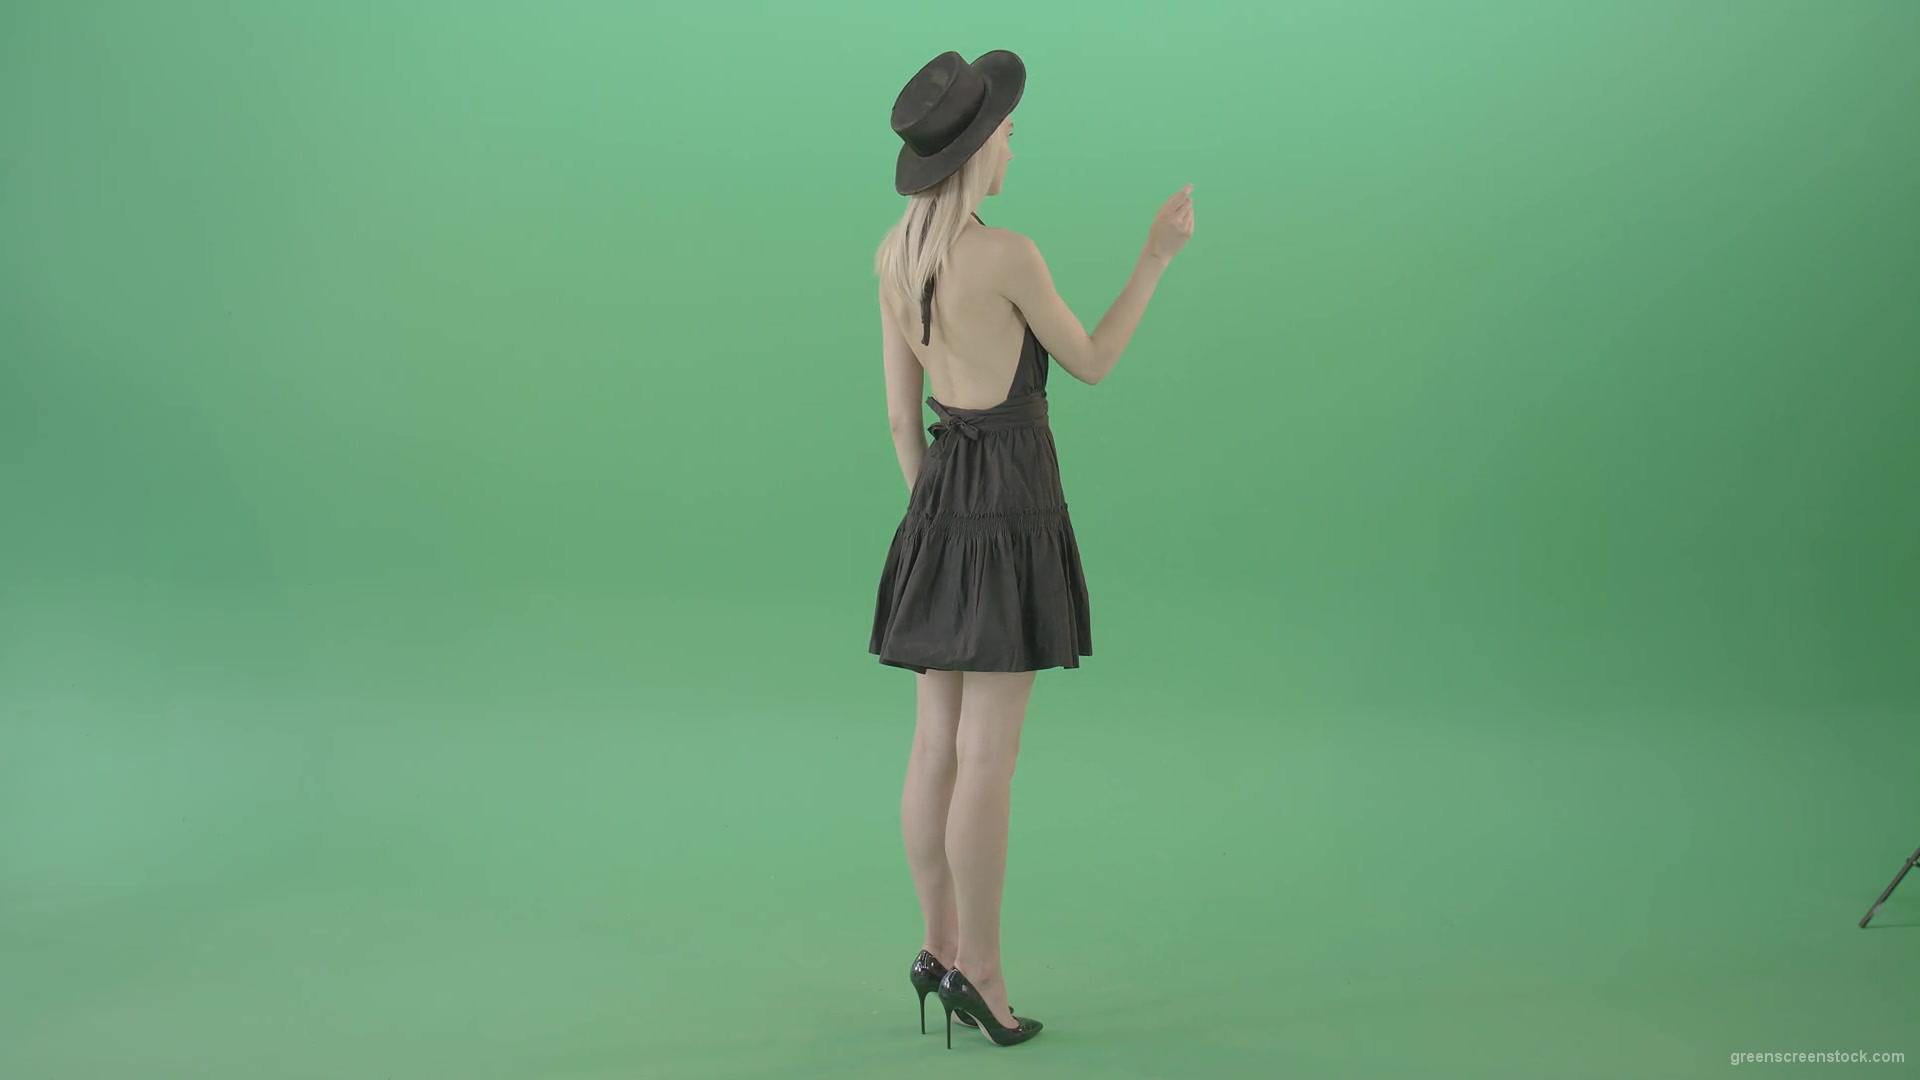 Full-size-fashion-girl-looking-virtual-products-on-touch-green-screen-4K-Video-Footage-1920_004 Green Screen Stock